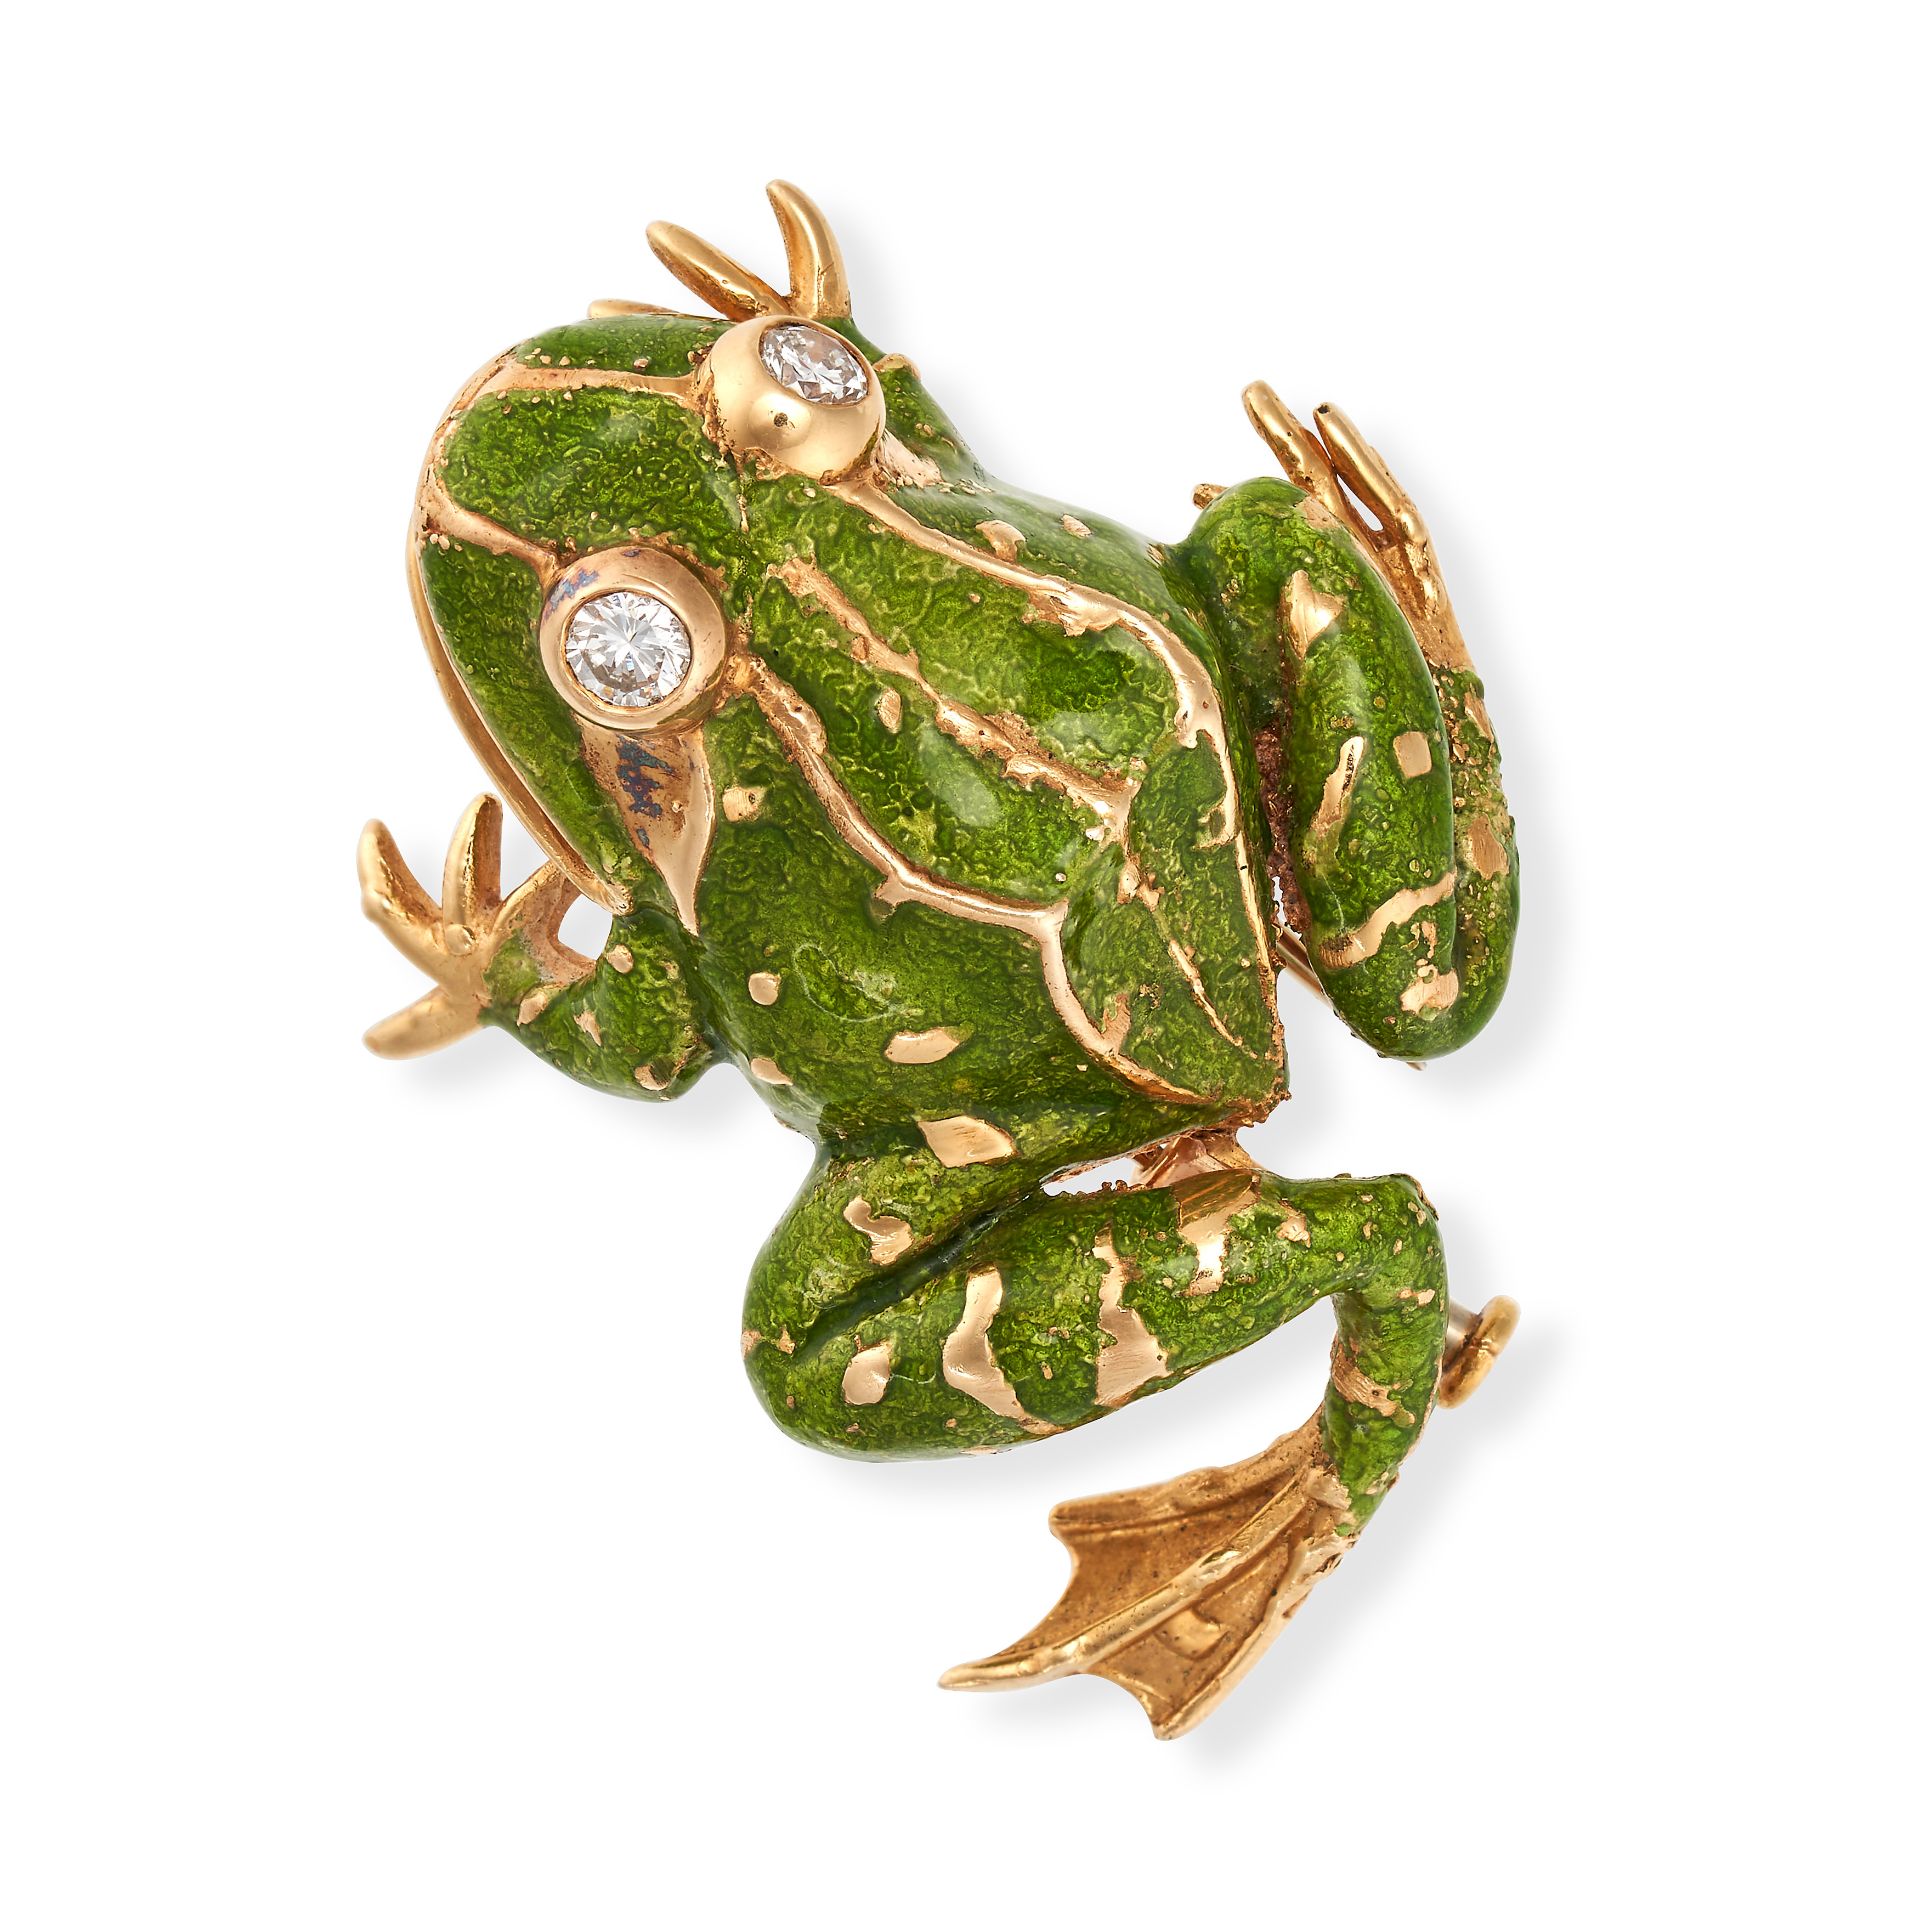 VAN CLEEF & ARPELS, A DIAMOND AND ENAMEL FROG BROOCH in 18ct yellow gold, designed as a frog reli...